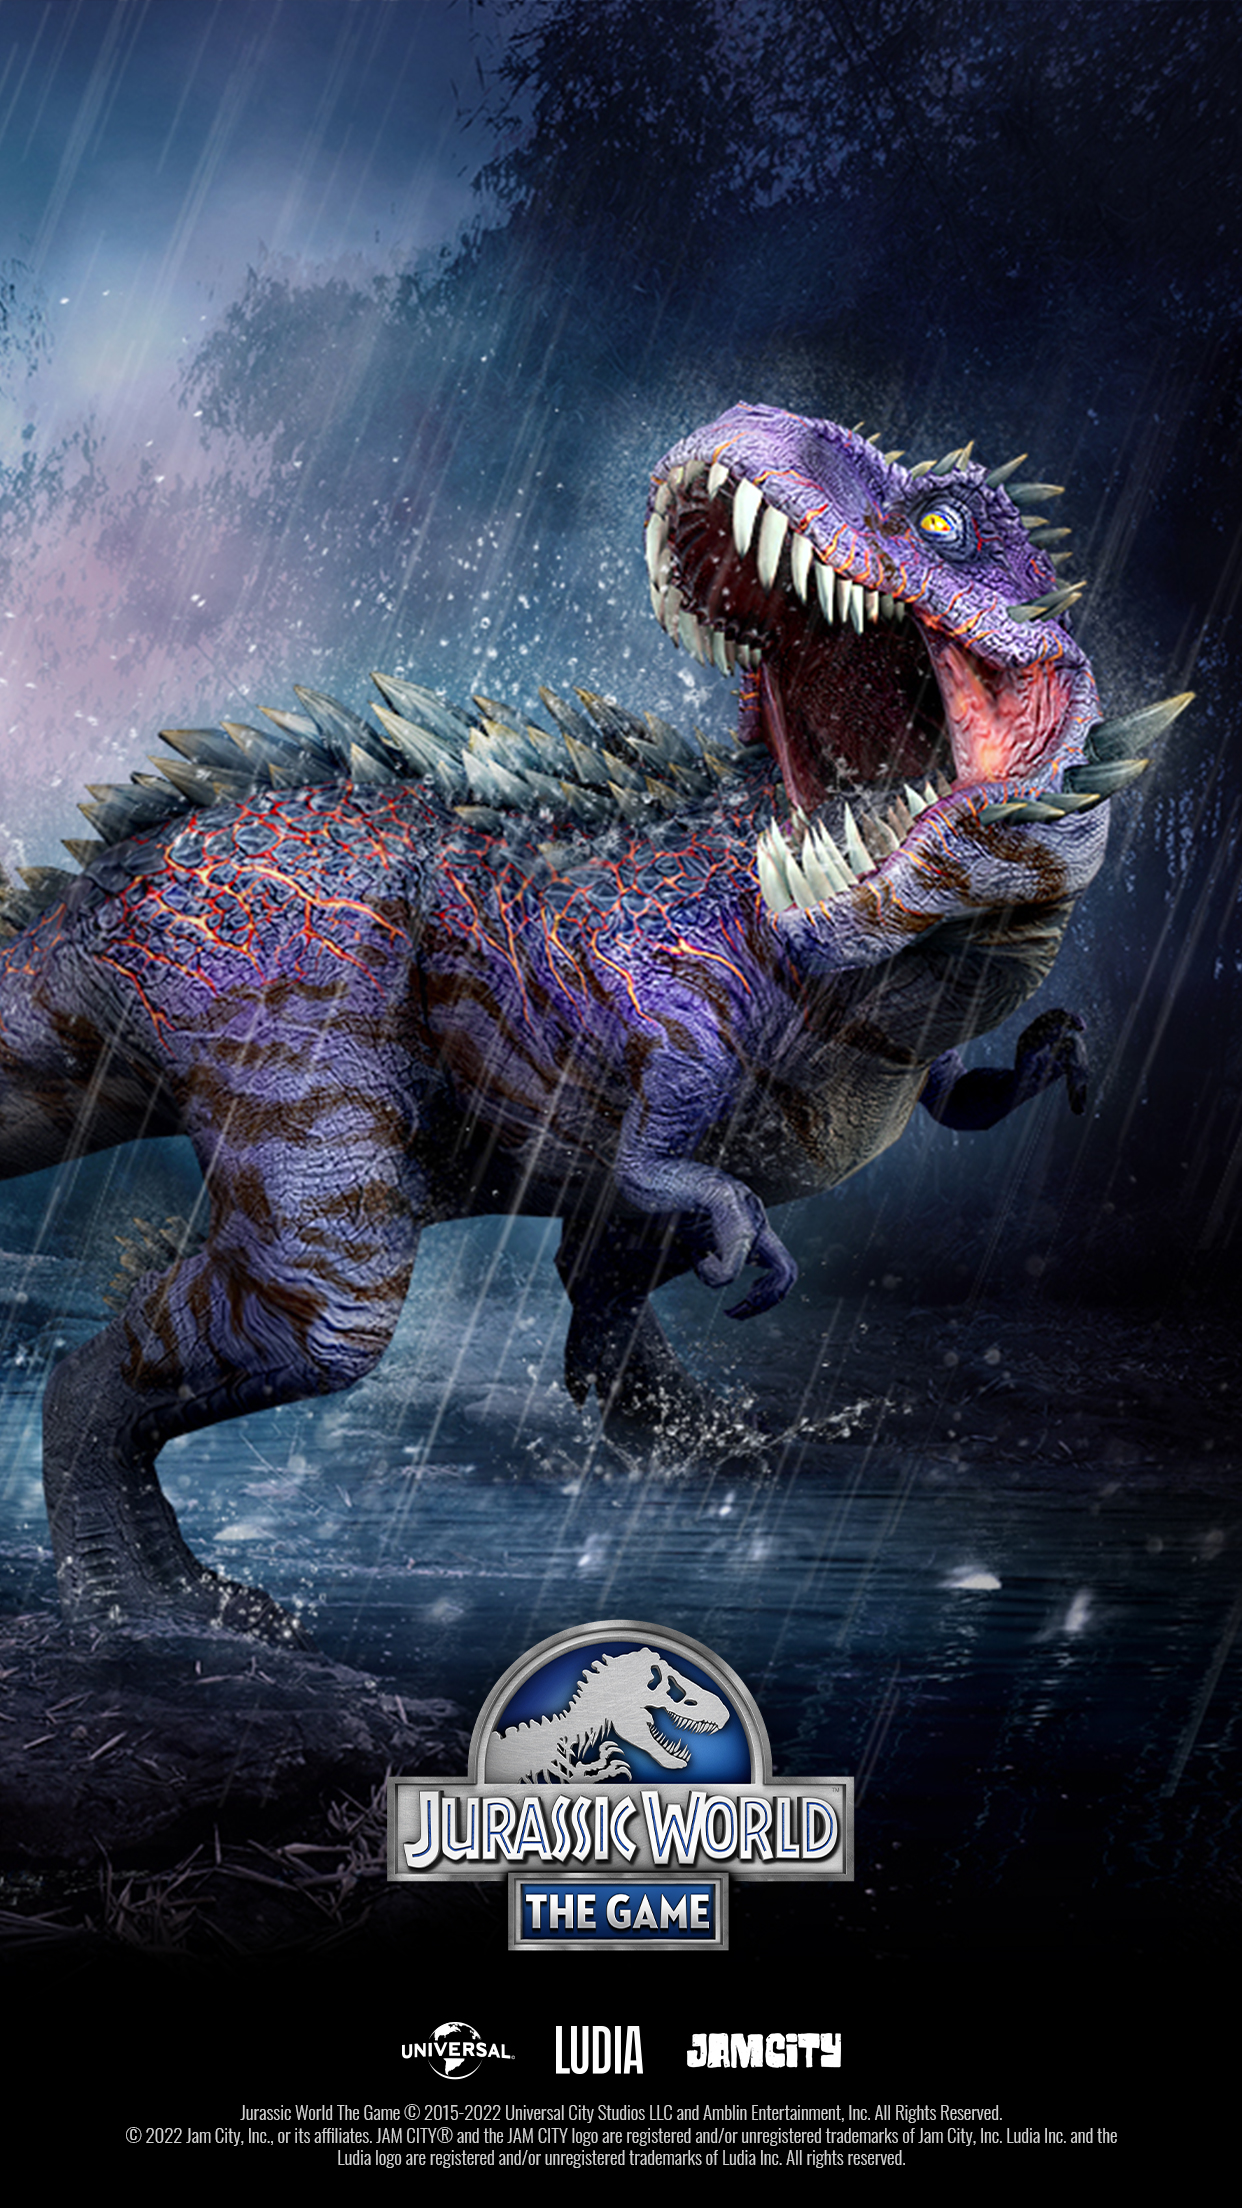 Jurassic World iPhone Wallpapers  Top Free Jurassic World iPhone  Backgrounds  WallpaperAccess